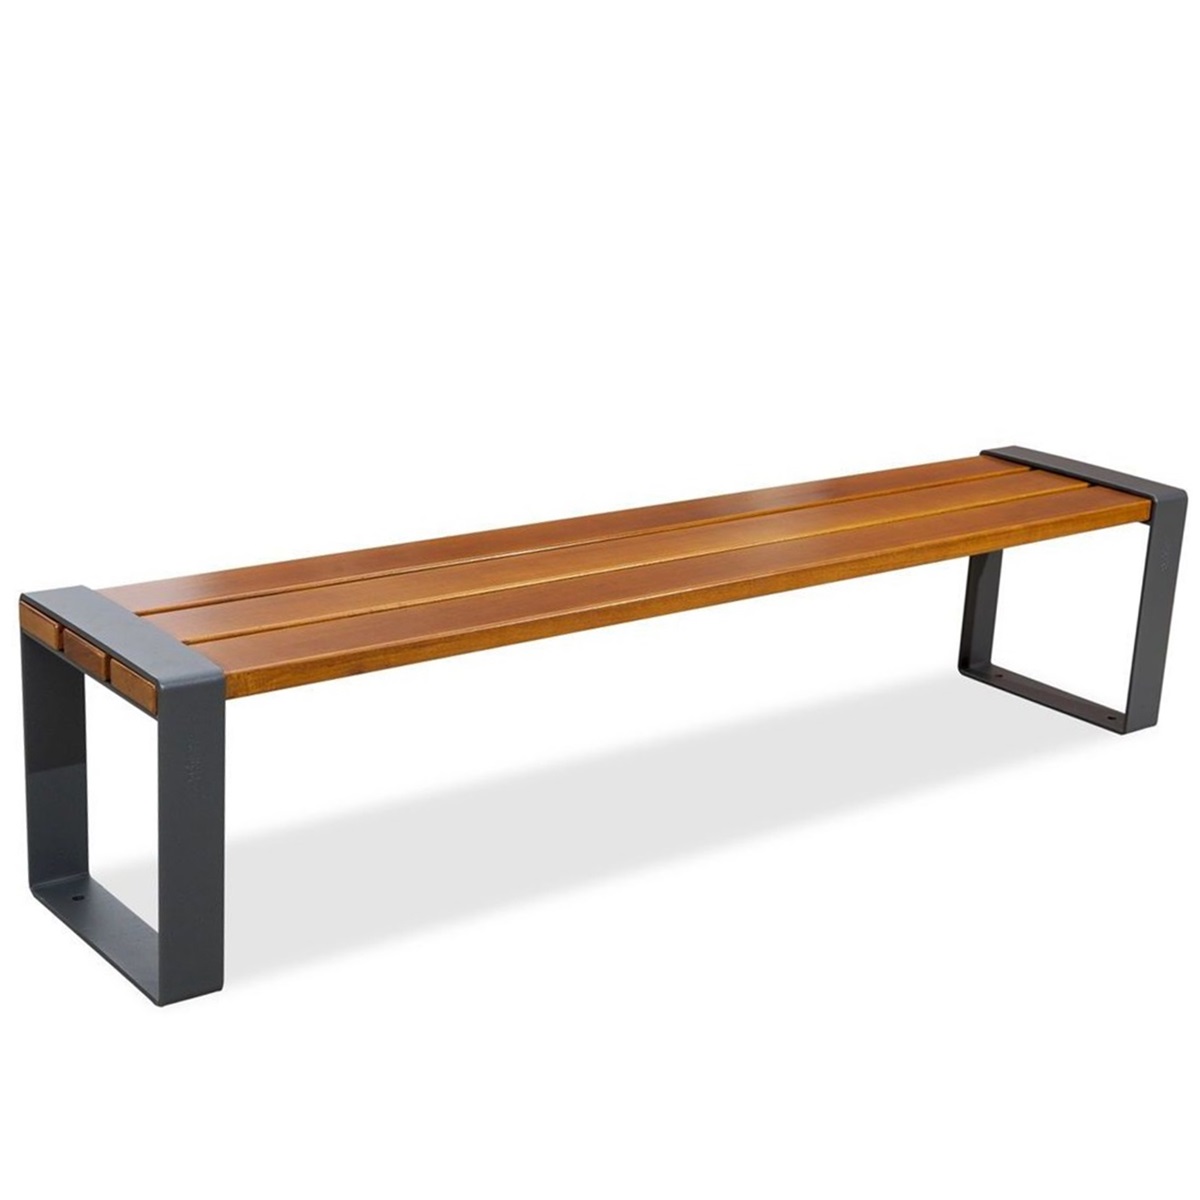 Marina Timber and Steel Bench